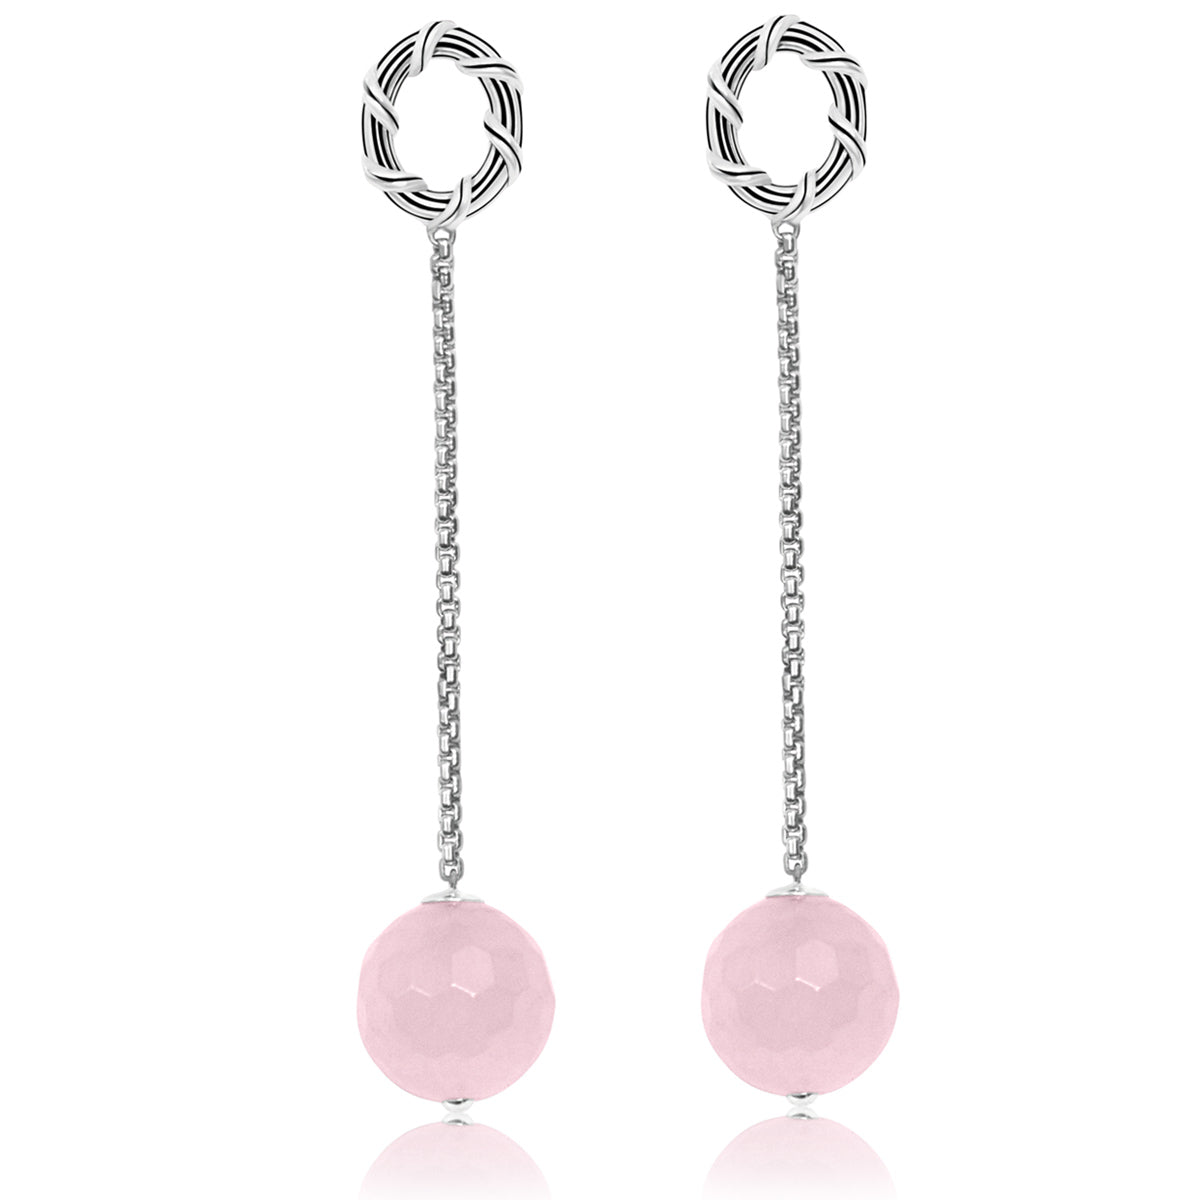 Bead Chain Earrings in sterling silver with rose quartz